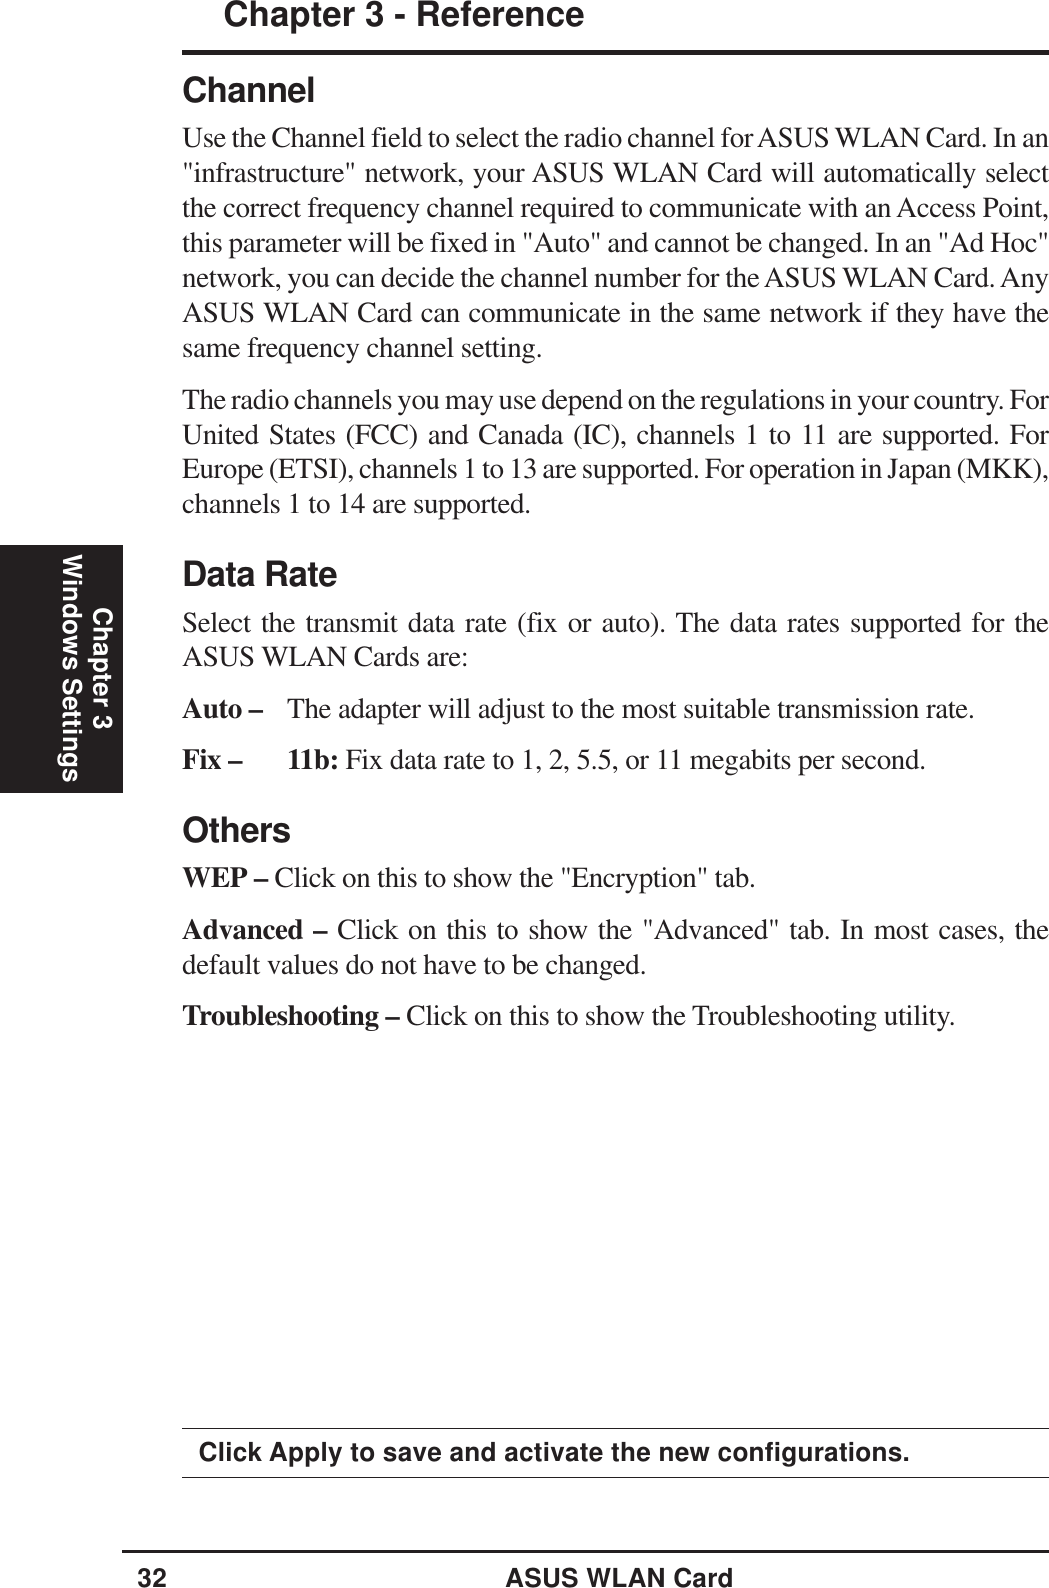 32 ASUS WLAN CardChapter 3 - ReferenceChapter 3Windows SettingsClick Apply to save and activate the new configurations.ChannelUse the Channel field to select the radio channel for ASUS WLAN Card. In an&quot;infrastructure&quot; network, your ASUS WLAN Card will automatically selectthe correct frequency channel required to communicate with an Access Point,this parameter will be fixed in &quot;Auto&quot; and cannot be changed. In an &quot;Ad Hoc&quot;network, you can decide the channel number for the ASUS WLAN Card. AnyASUS WLAN Card can communicate in the same network if they have thesame frequency channel setting.The radio channels you may use depend on the regulations in your country. ForUnited States (FCC) and Canada (IC), channels 1 to 11 are supported. ForEurope (ETSI), channels 1 to 13 are supported. For operation in Japan (MKK),channels 1 to 14 are supported.Data RateSelect the transmit data rate (fix or auto). The data rates supported for theASUS WLAN Cards are:Auto – The adapter will adjust to the most suitable transmission rate.Fix – 11b: Fix data rate to 1, 2, 5.5, or 11 megabits per second.OthersWEP – Click on this to show the &quot;Encryption&quot; tab.Advanced – Click on this to show the &quot;Advanced&quot; tab. In most cases, thedefault values do not have to be changed.Troubleshooting – Click on this to show the Troubleshooting utility.